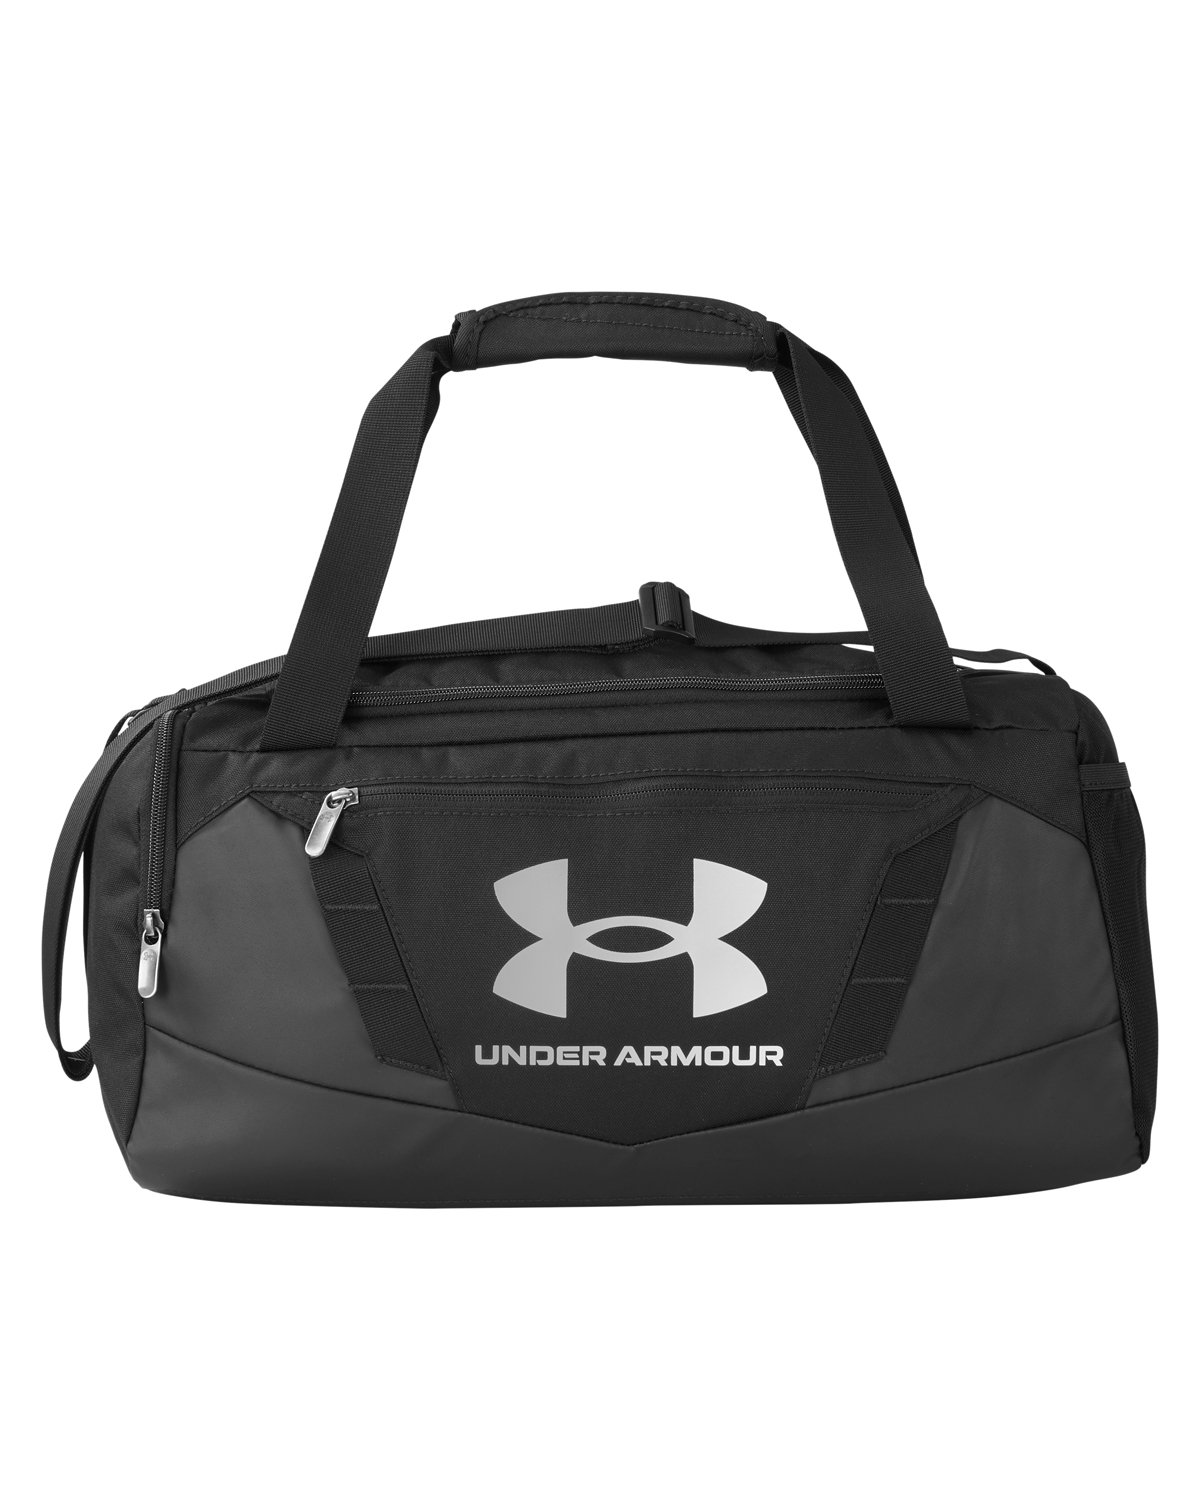 Under Armour 1369221 - Undeniable 5.0 XS Duffel Bag